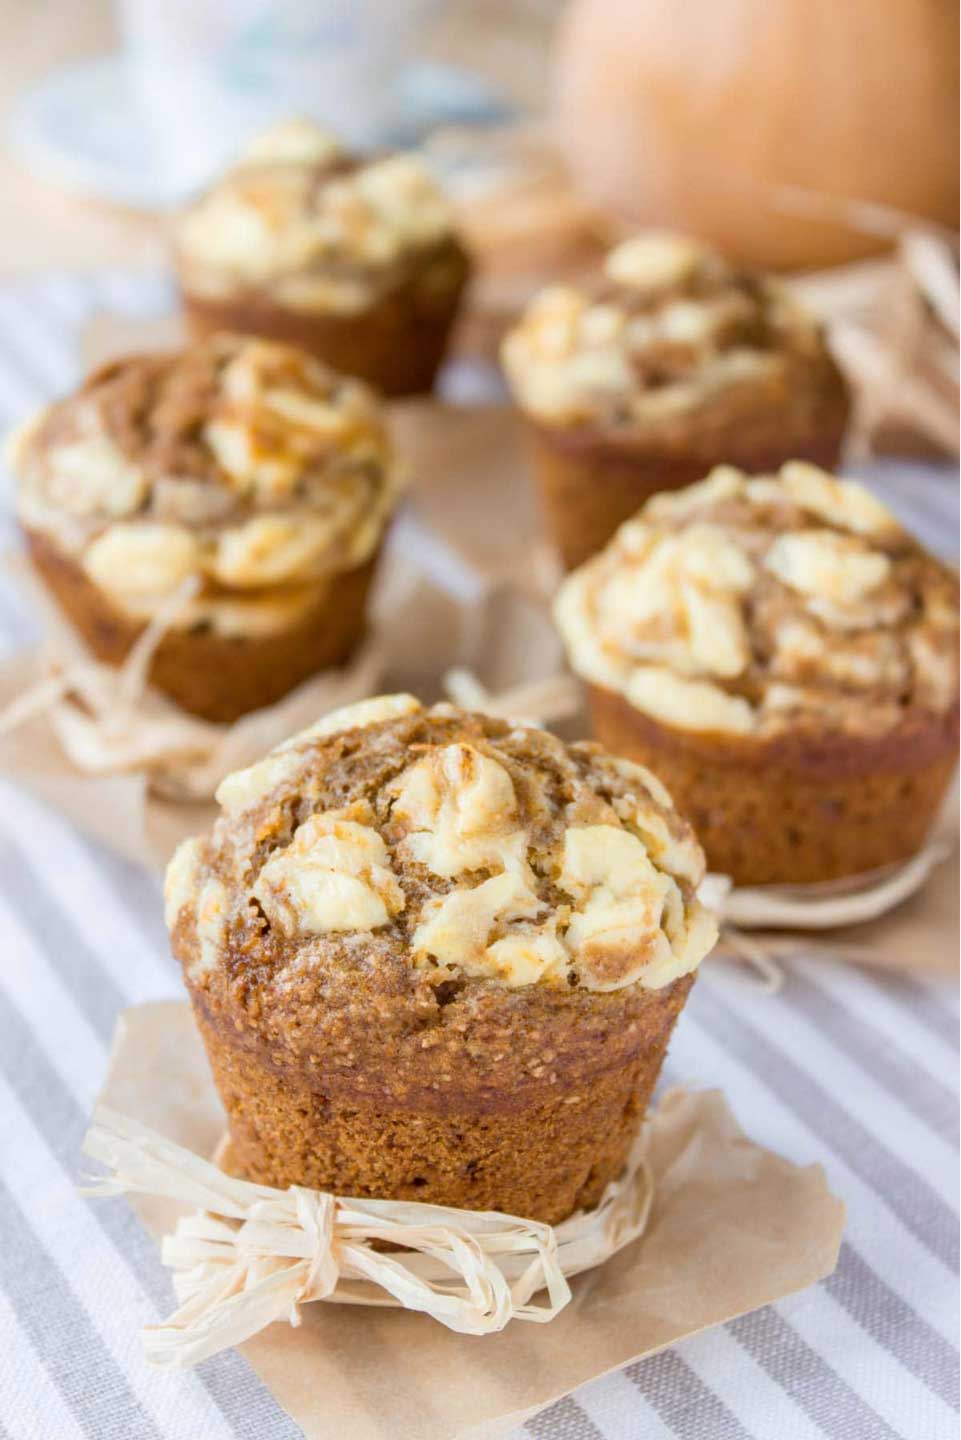 From paleo to gluten free, sugar free to whole grain! No matter what “healthy” means to you, we’ve got pumpkin muffins you’ll love! Unique flavor combos and lots of decadence … but so nutritious, too! These healthy pumpkin muffin recipes are easy to make – whip one up for quick breakfasts or healthy snacks! | pumpkin recipes | pumpkin muffins healthy | gluten free | grain free | paleo | whole wheat | refined sugar free | dairy free | #healthyrecipes #pumpkin #muffins | www.TwoHealthyKitchens.com